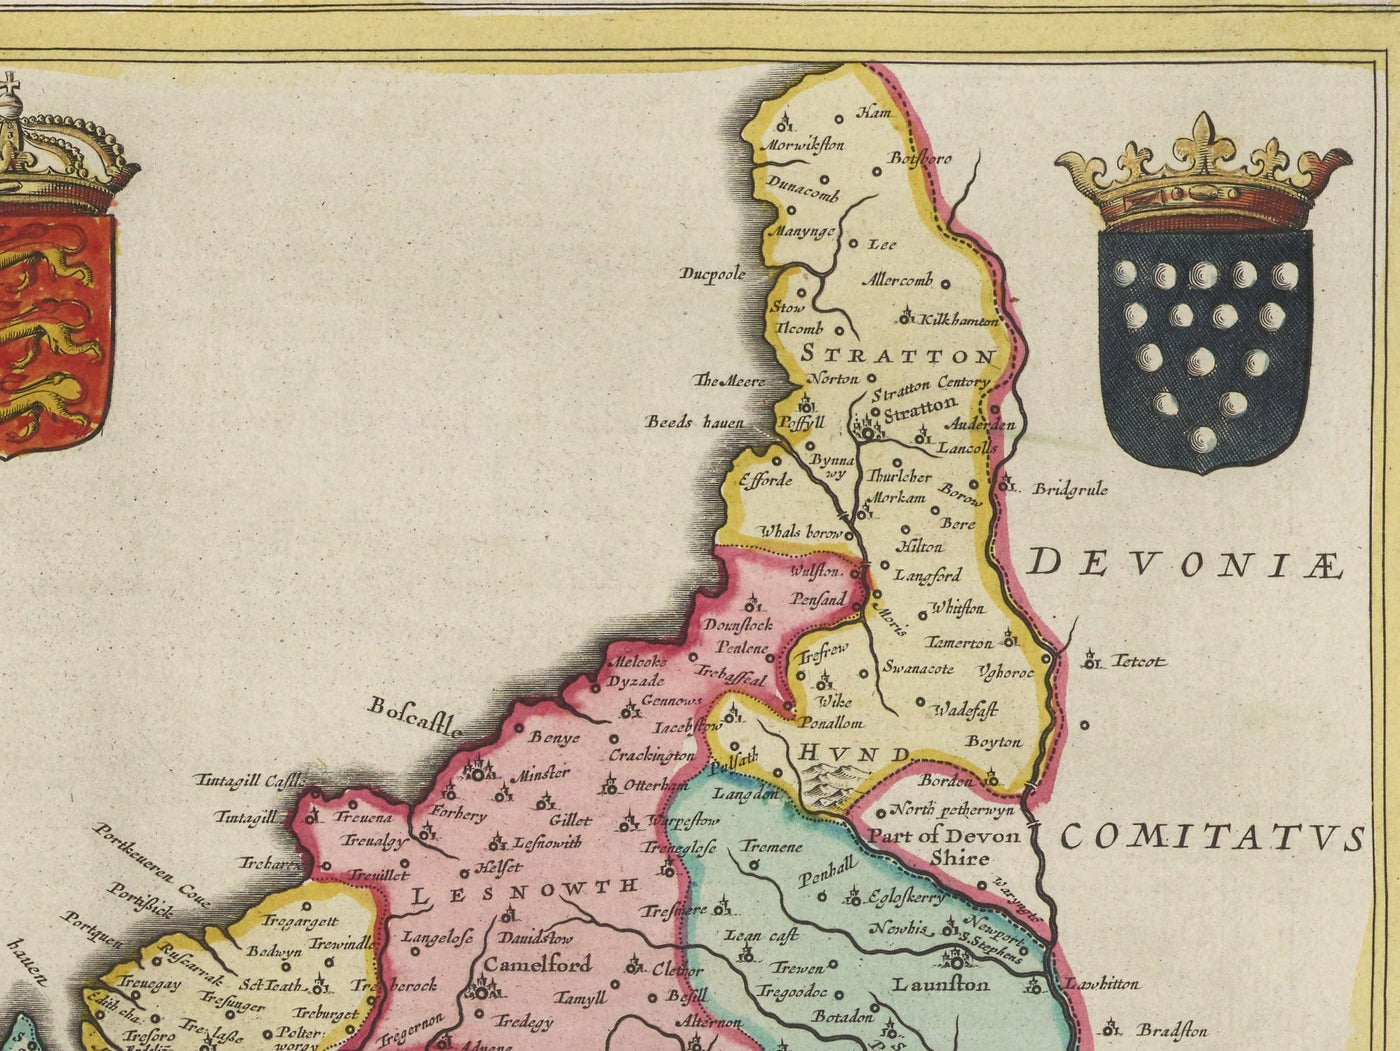 Old Map of Cornwall in 1665 by Joan Blaeu - Penzance, St Ives, Falmouth, Lands End, Padstow, Redruth, West Country